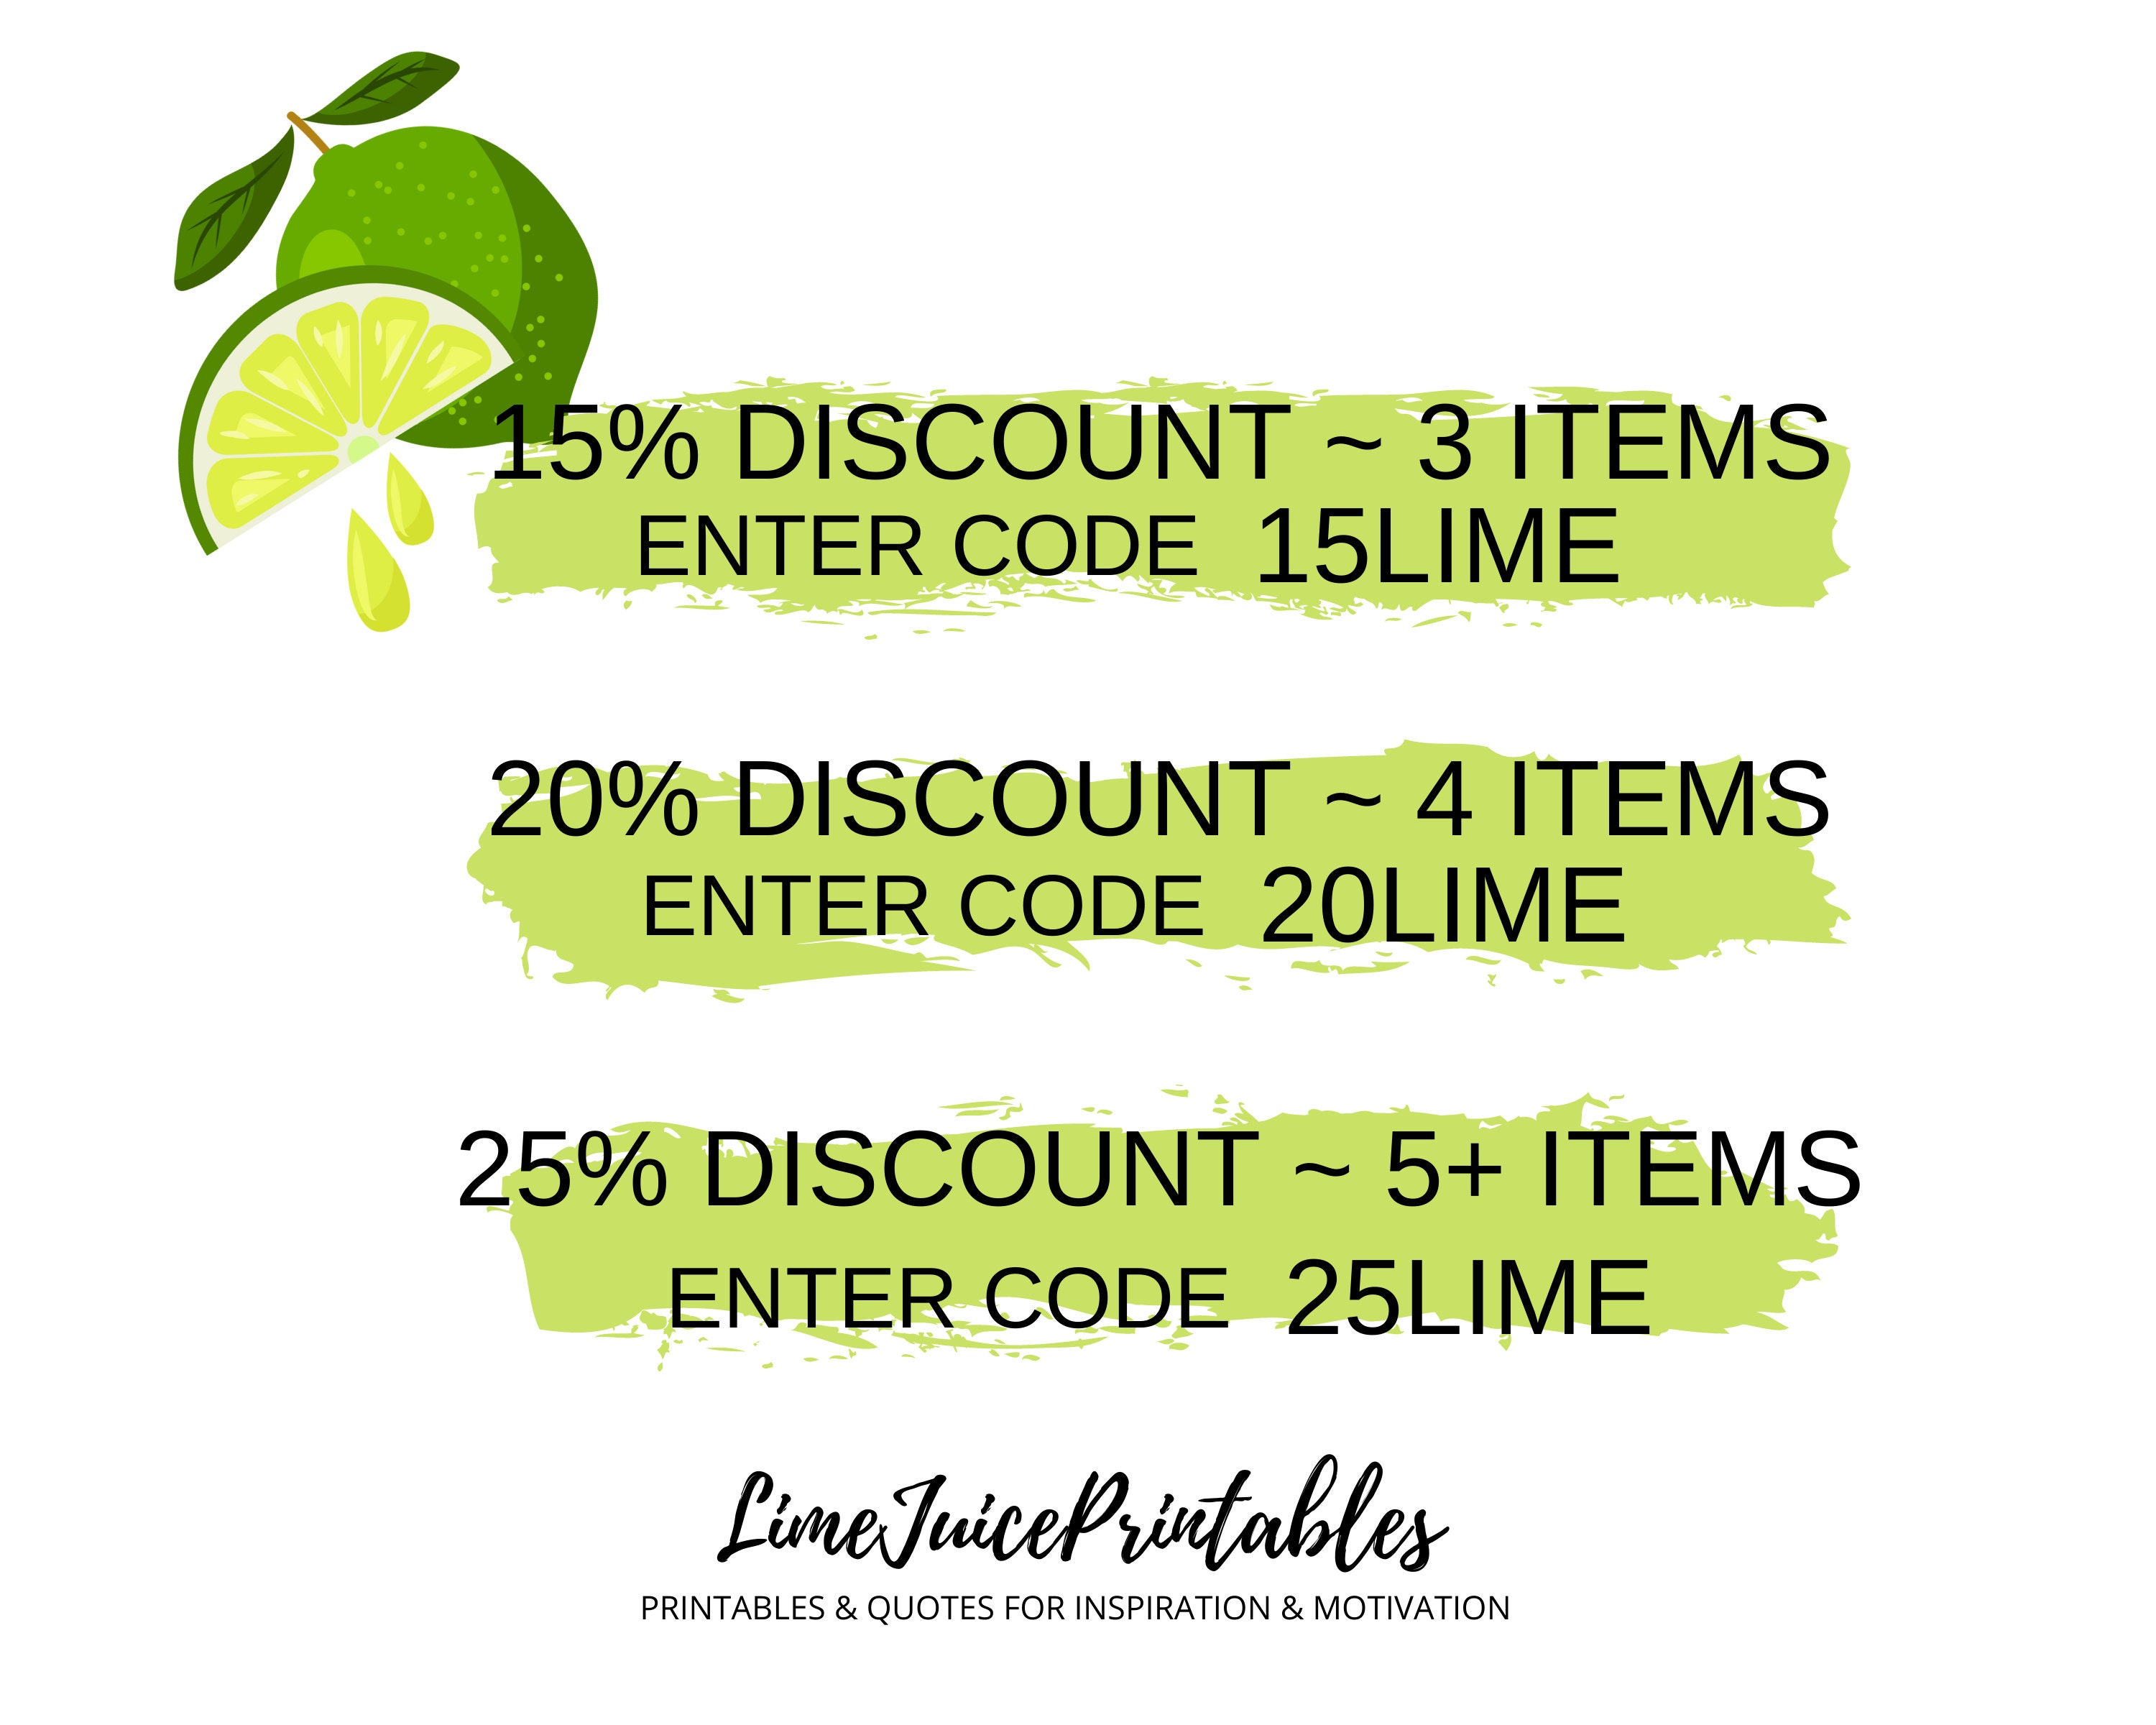 Discount Codes Tracker Printable Coupon Code Tracker Shop Discount